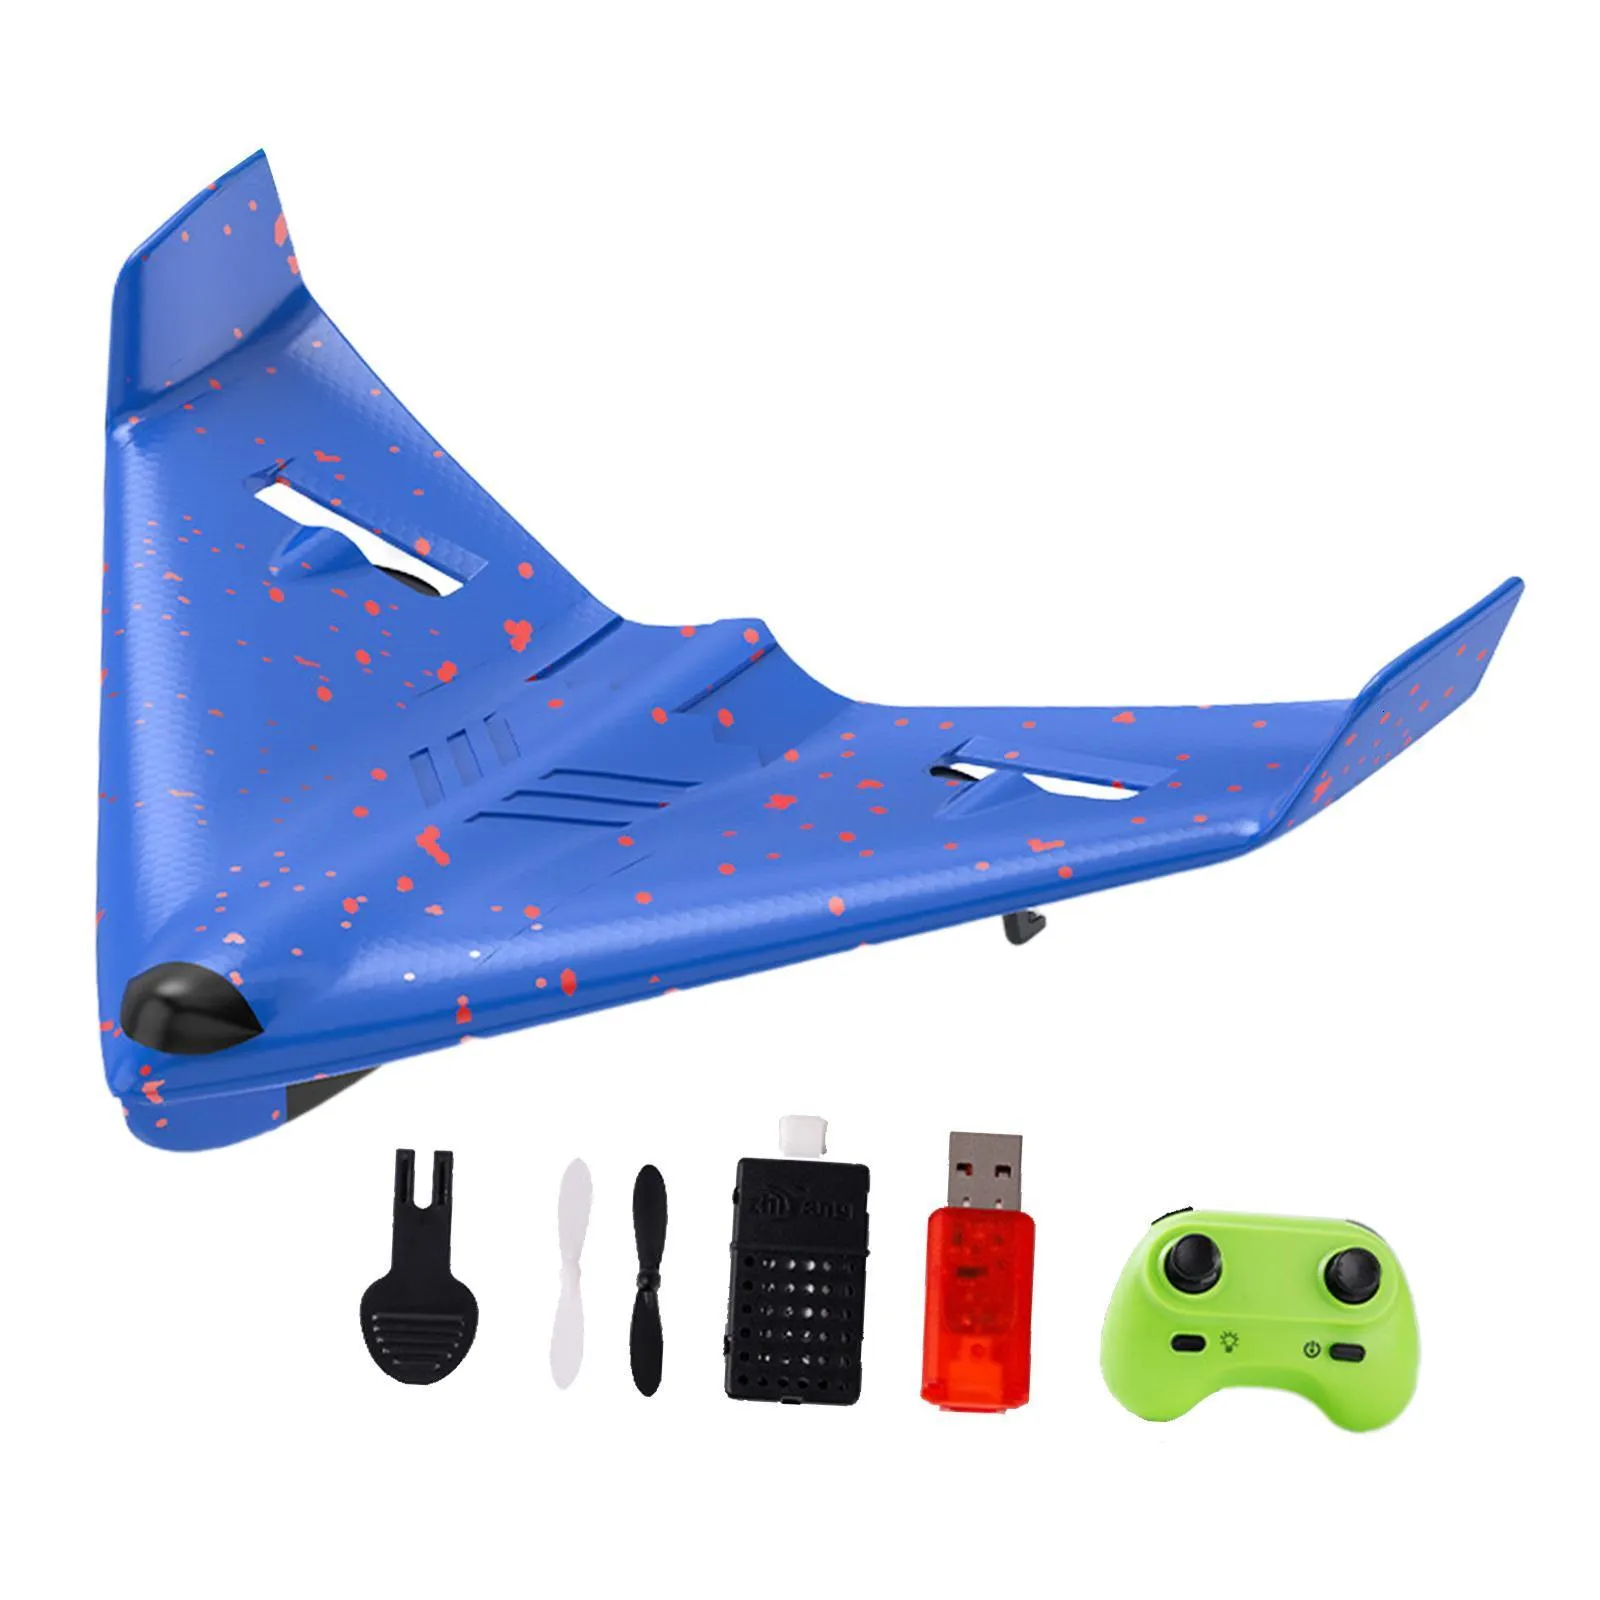 2 channel RC Airplane Easy to Control Portable Glider Plane for Kids Remote Control Flying Model Glider Airplane Foam Toys